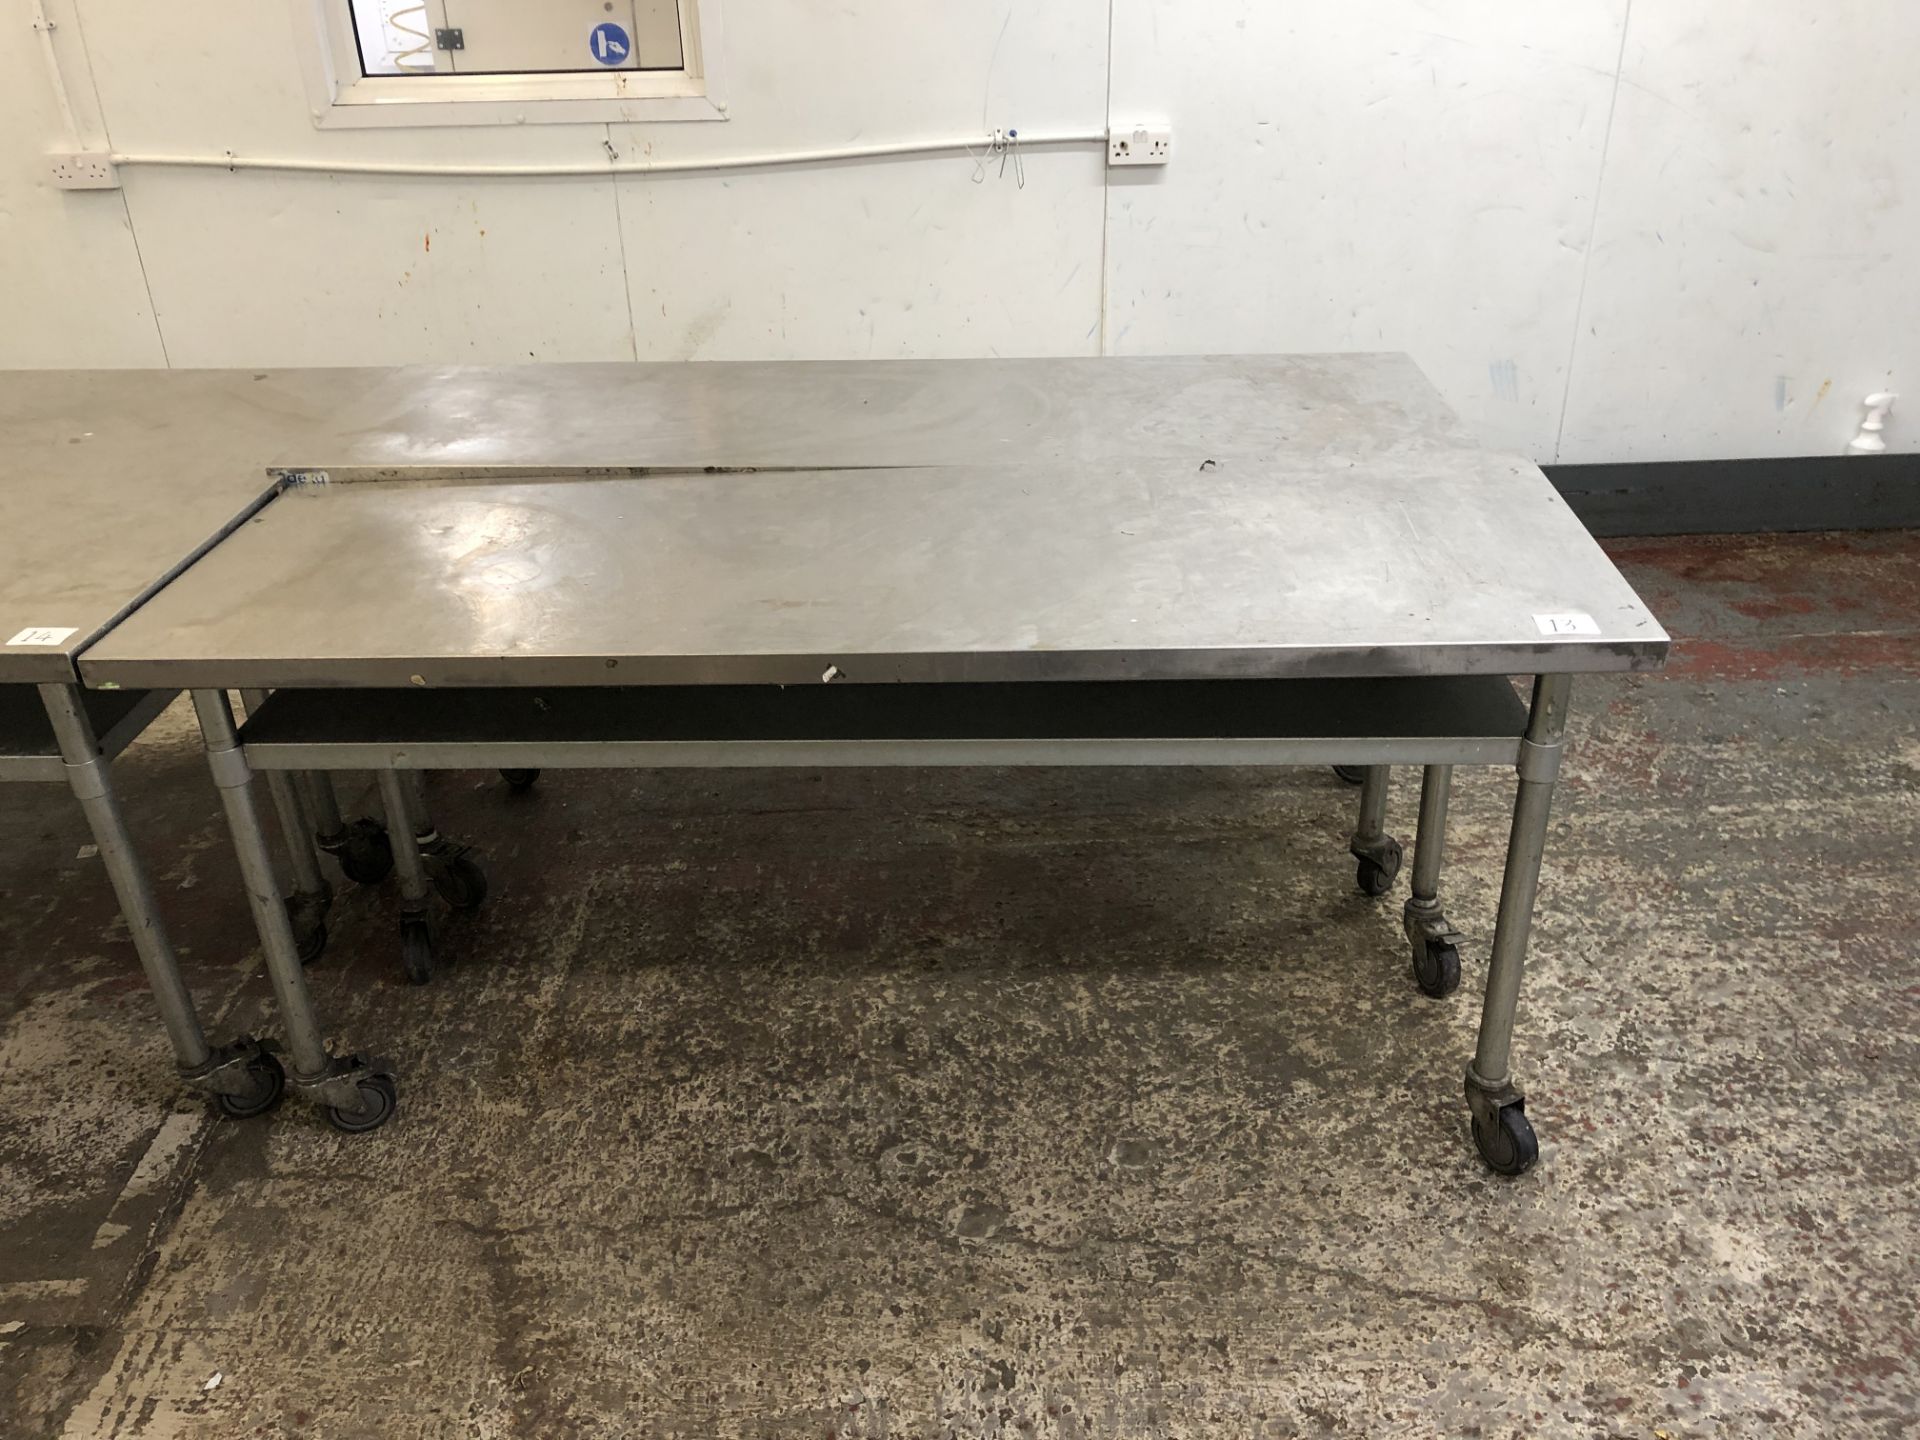 (2) Stainless Steel Mobile Preparation Tables